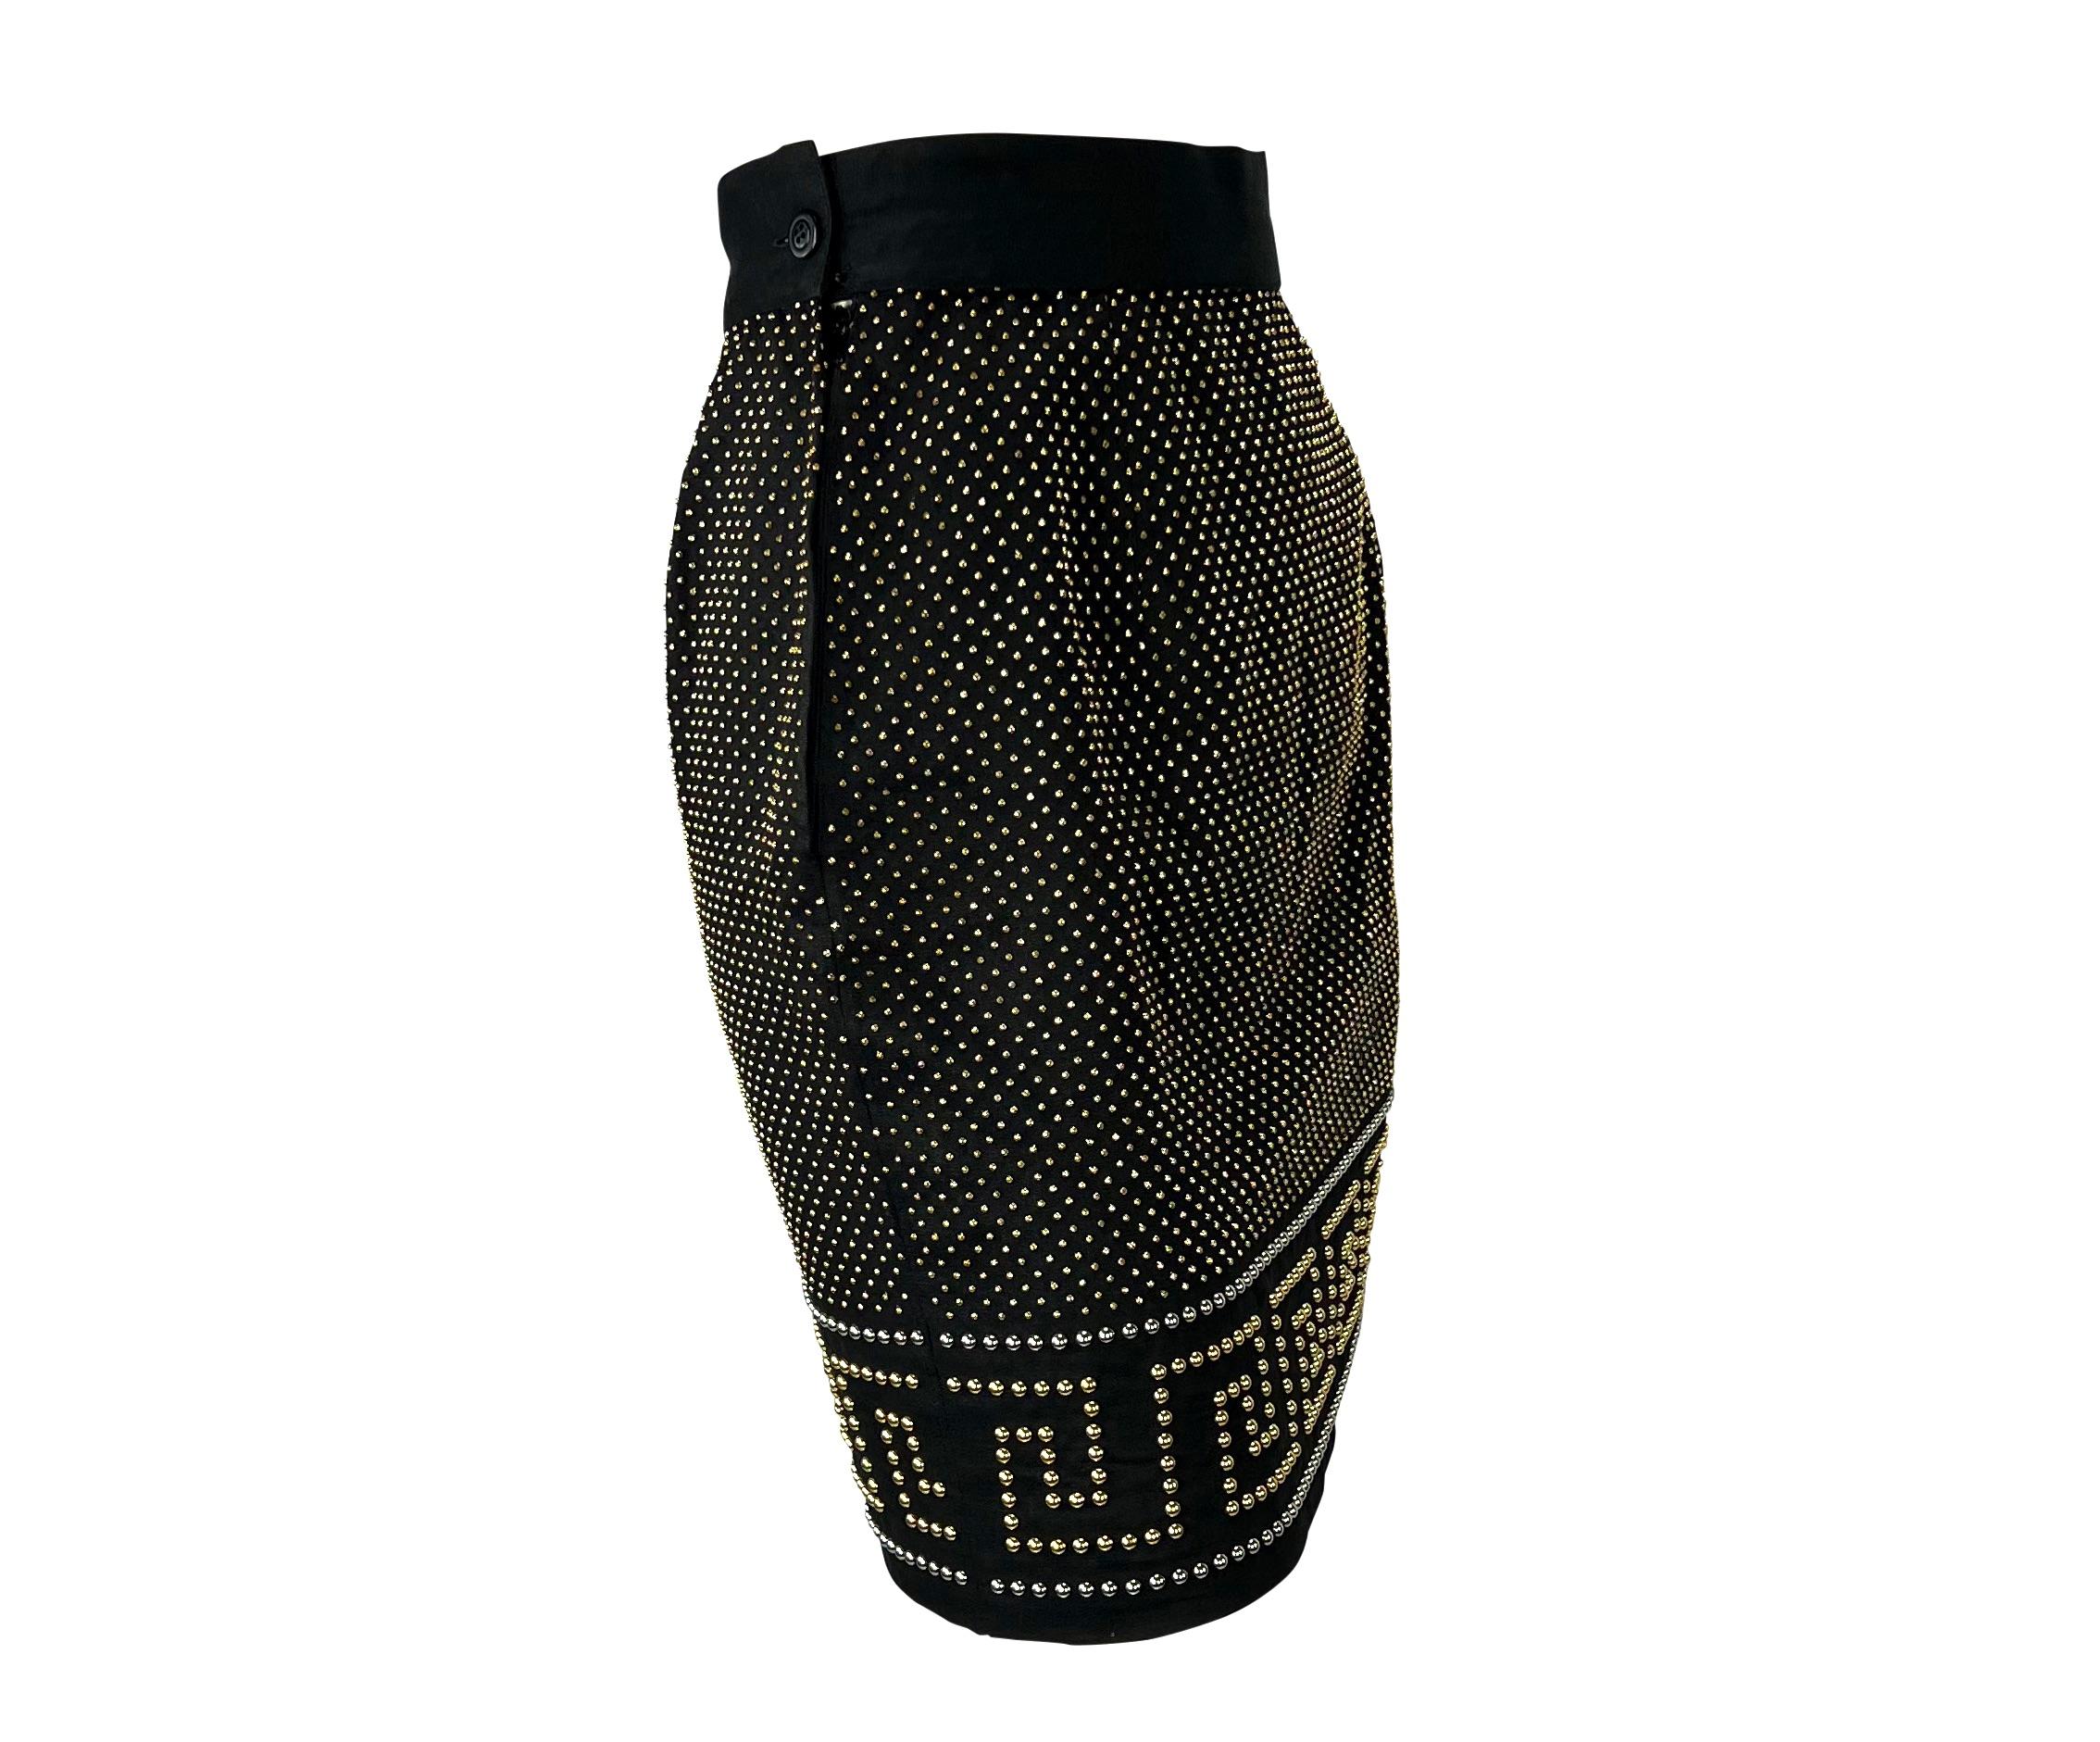 F/W 1992 Gianni Versace Couture 'Miss S&M' Studded Greek Key Skirt For Sale 5